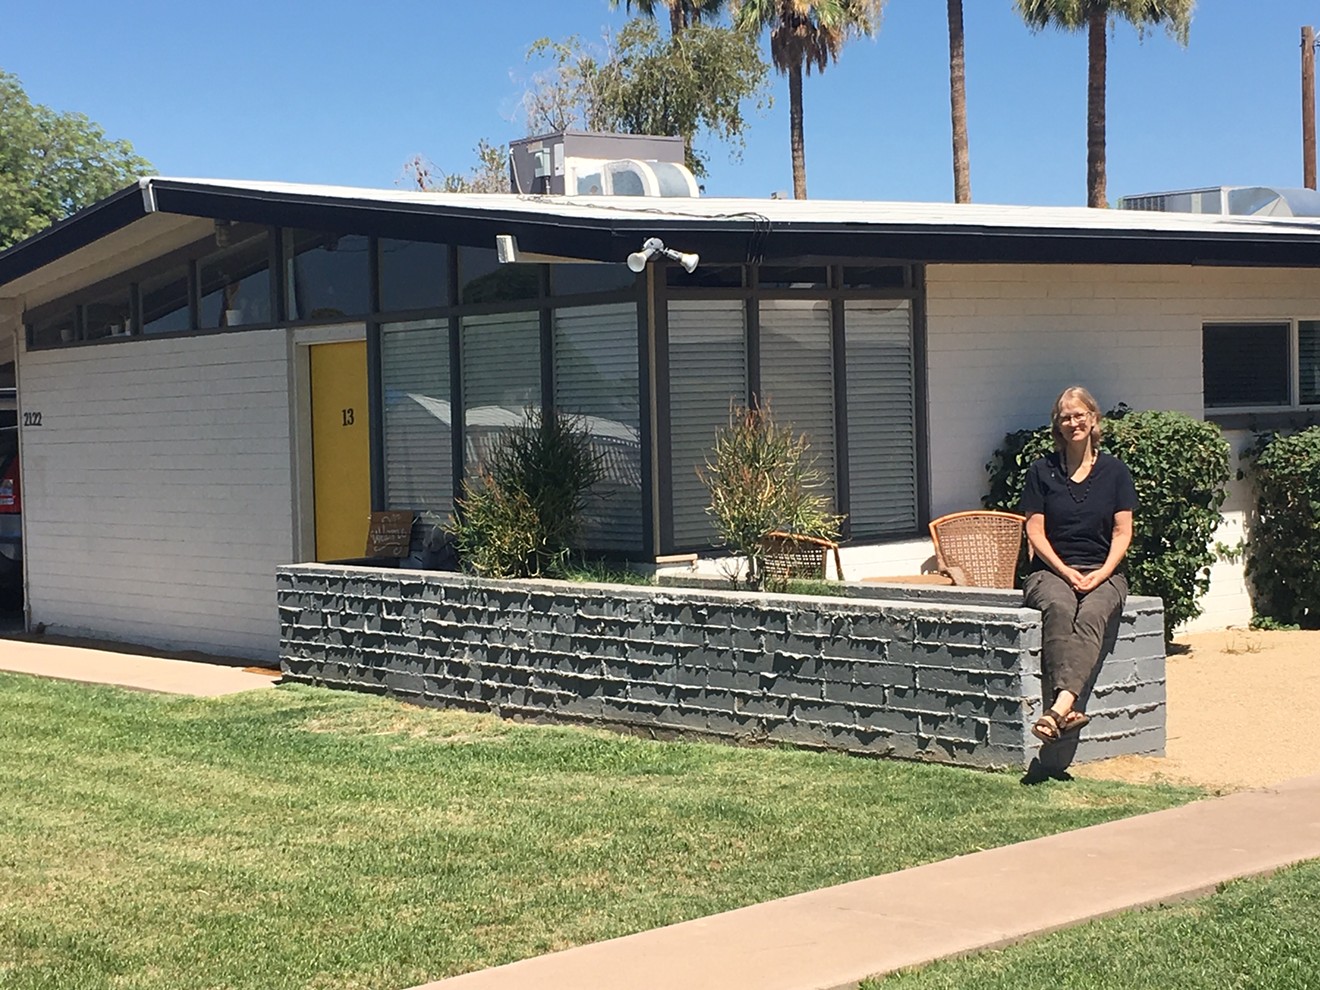 Artist Carolyn Lavender stopped Home Depot from tearing down the Mode apartment complex and other spots in the Loma Linda neighborhood.